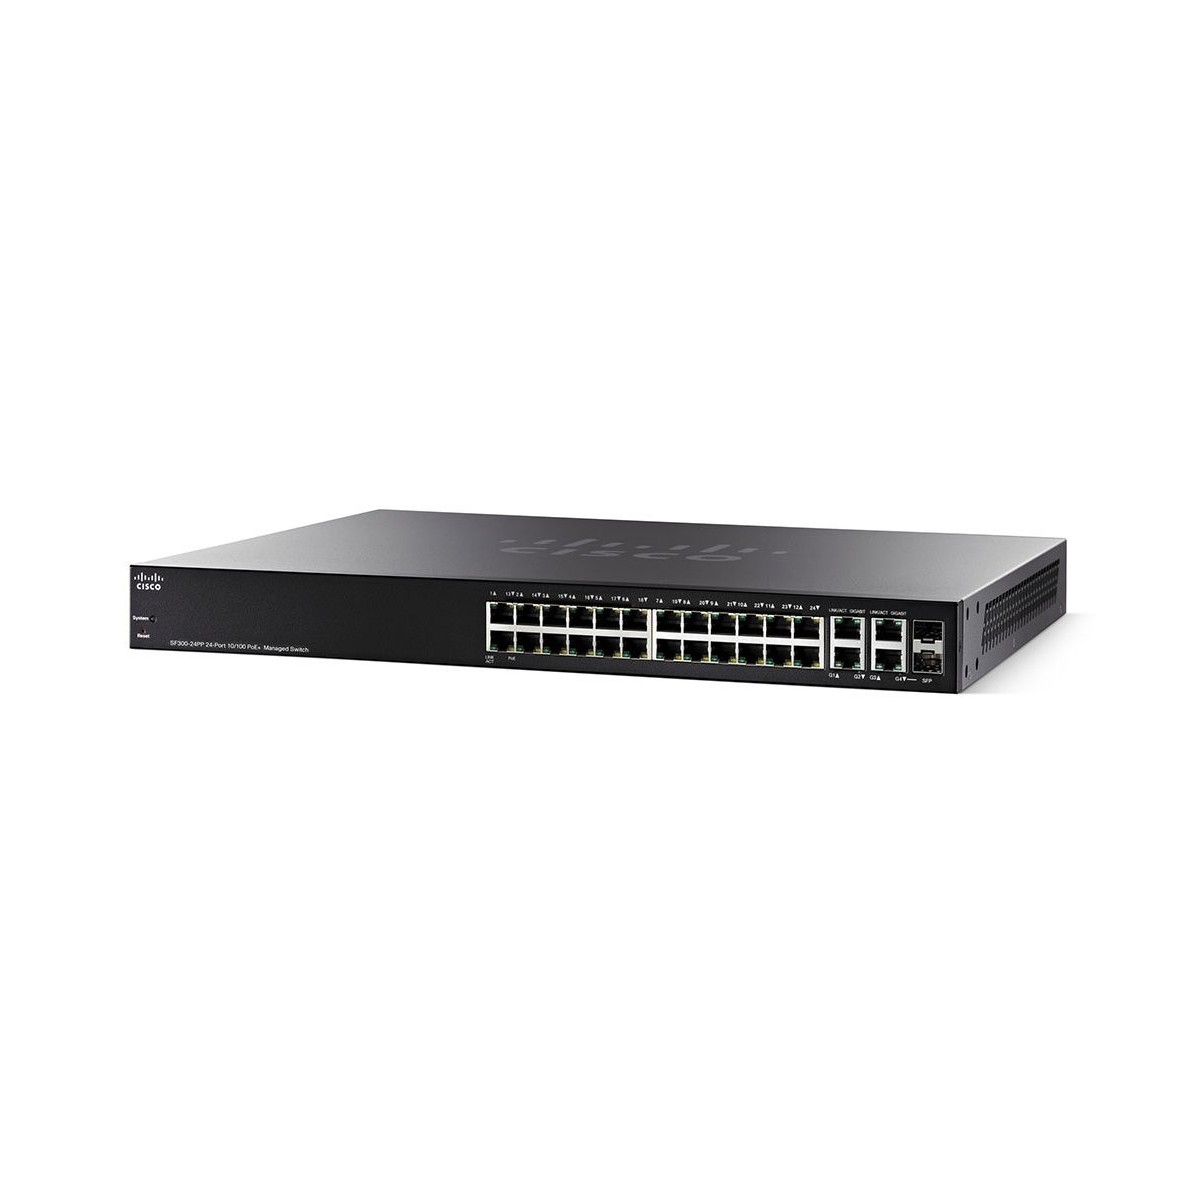 Cisco SF350-24P - Managed - L2/L3 - Fast Ethernet (10/100) - Power over Ethernet (PoE) - Rack mounting